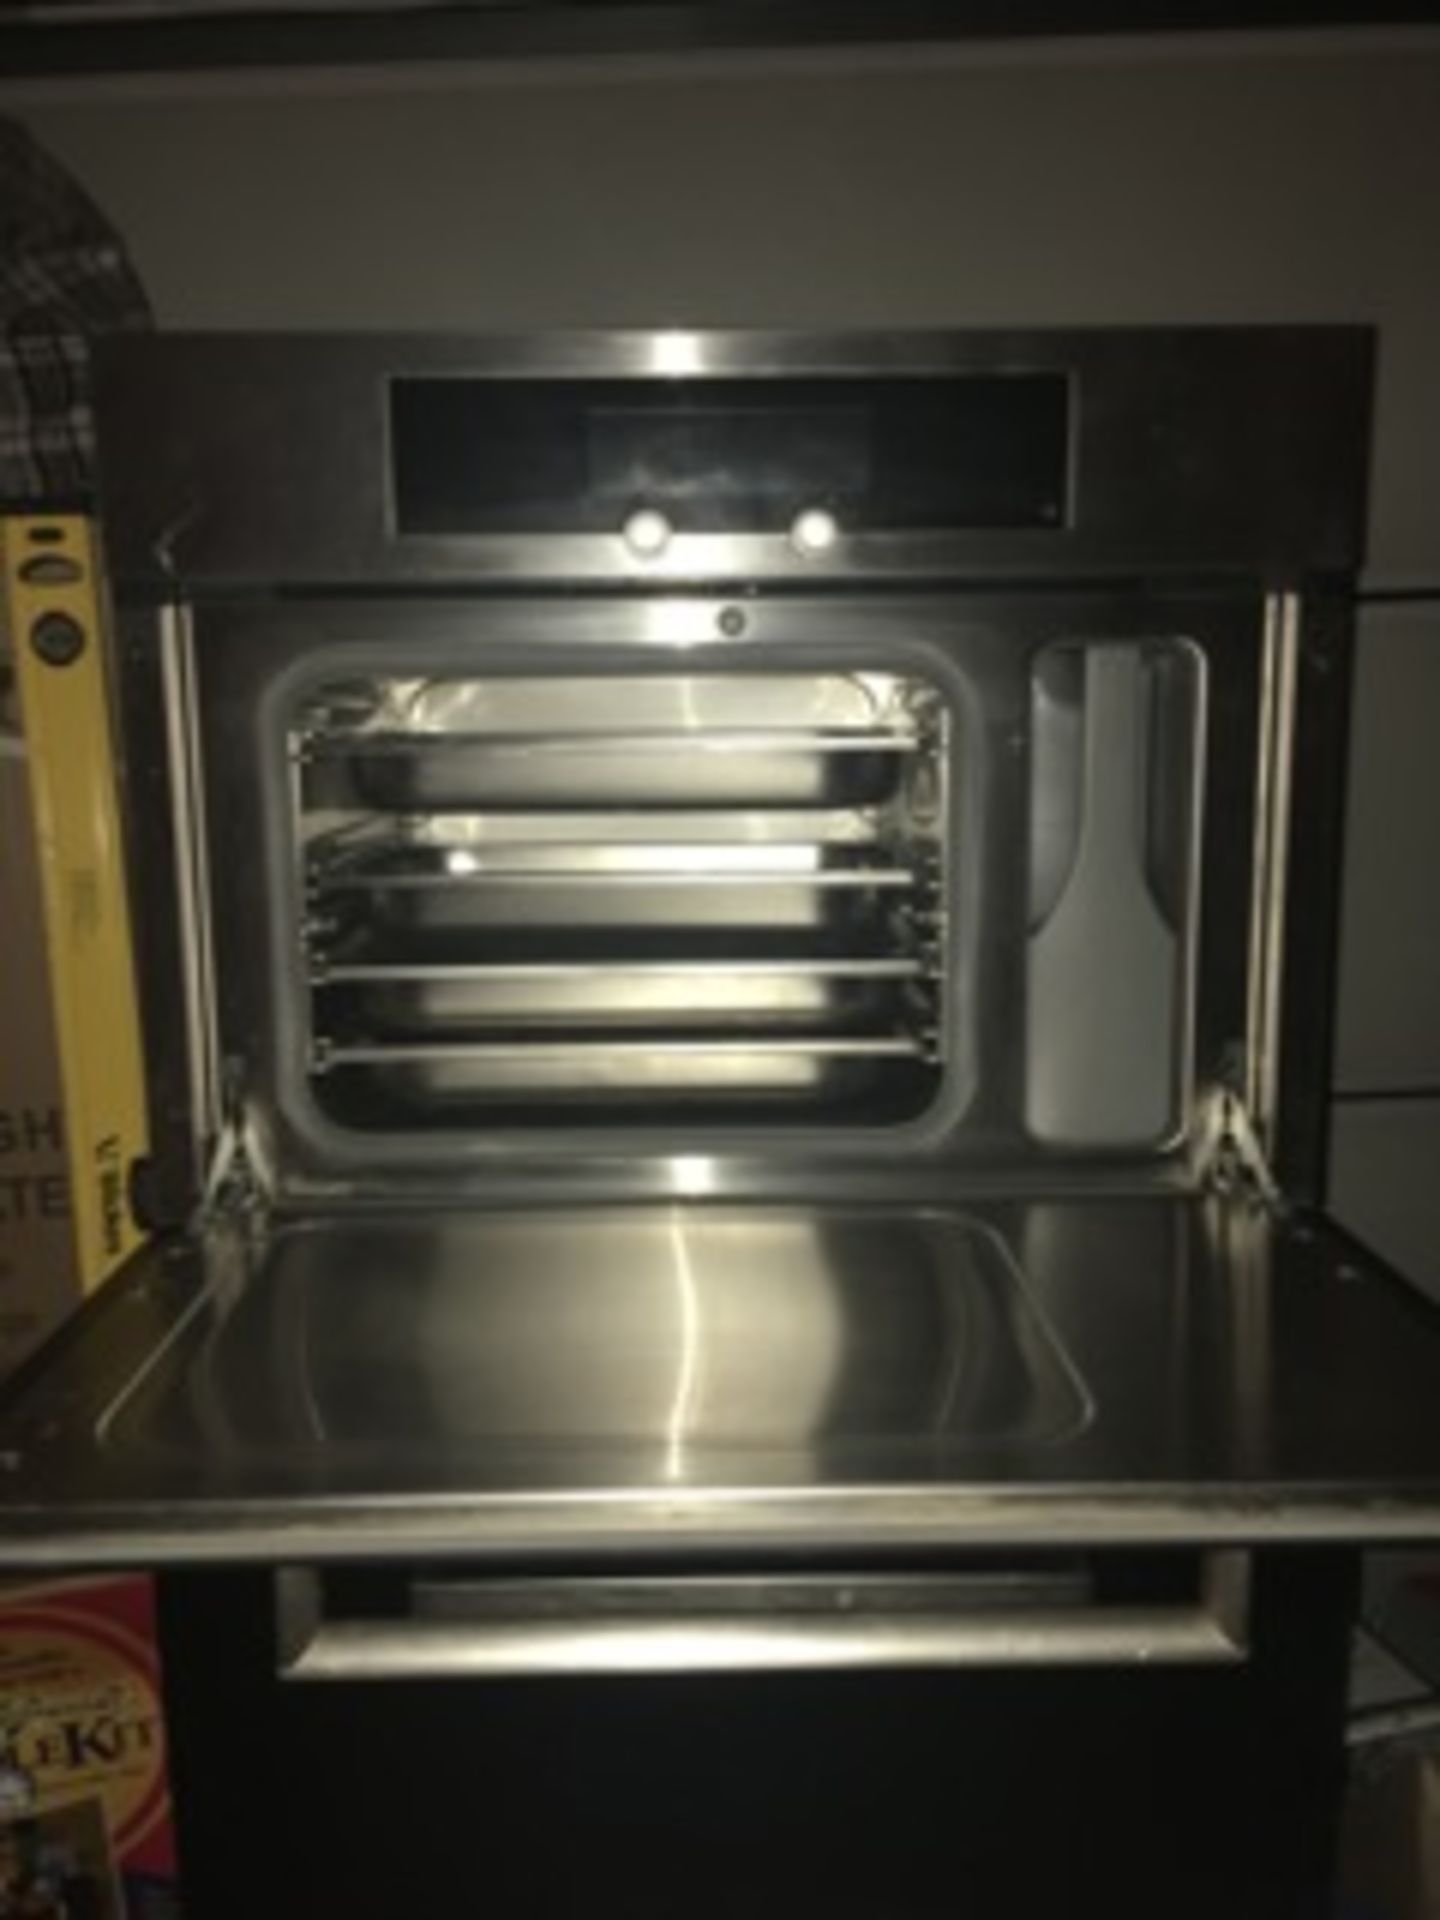 Miele steam oven - Image 4 of 4